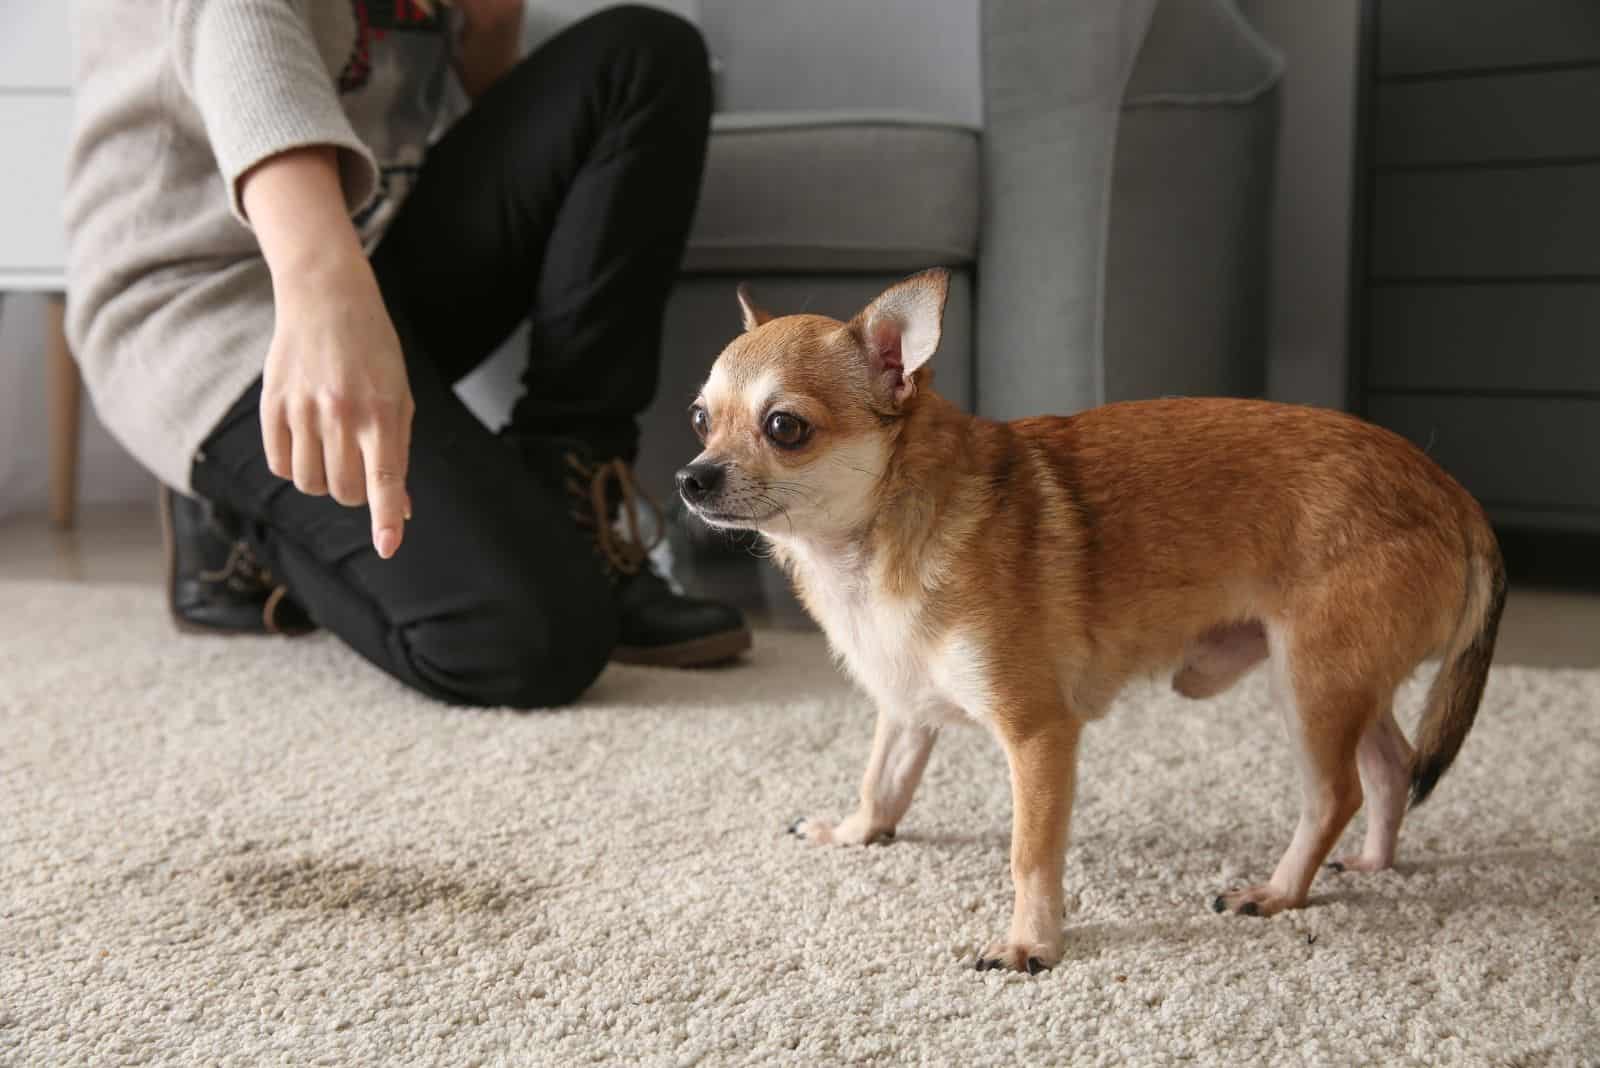 owner scolding chihuahua and pointing to the wet part of the carpet